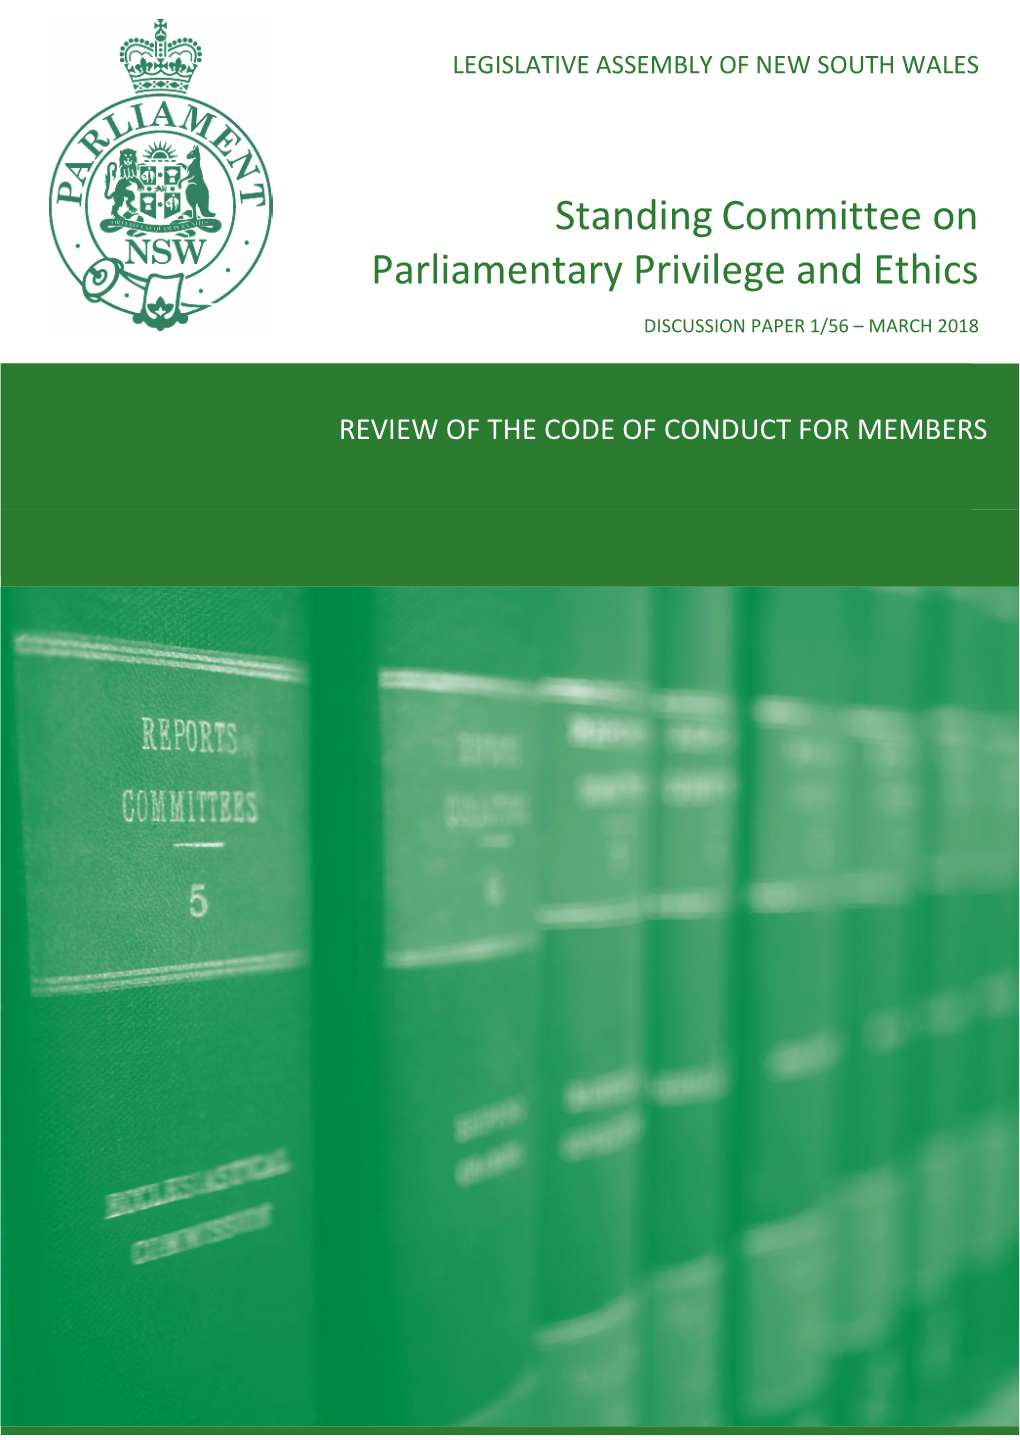 Standing Committee on Parliamentary Privilege and Ethics